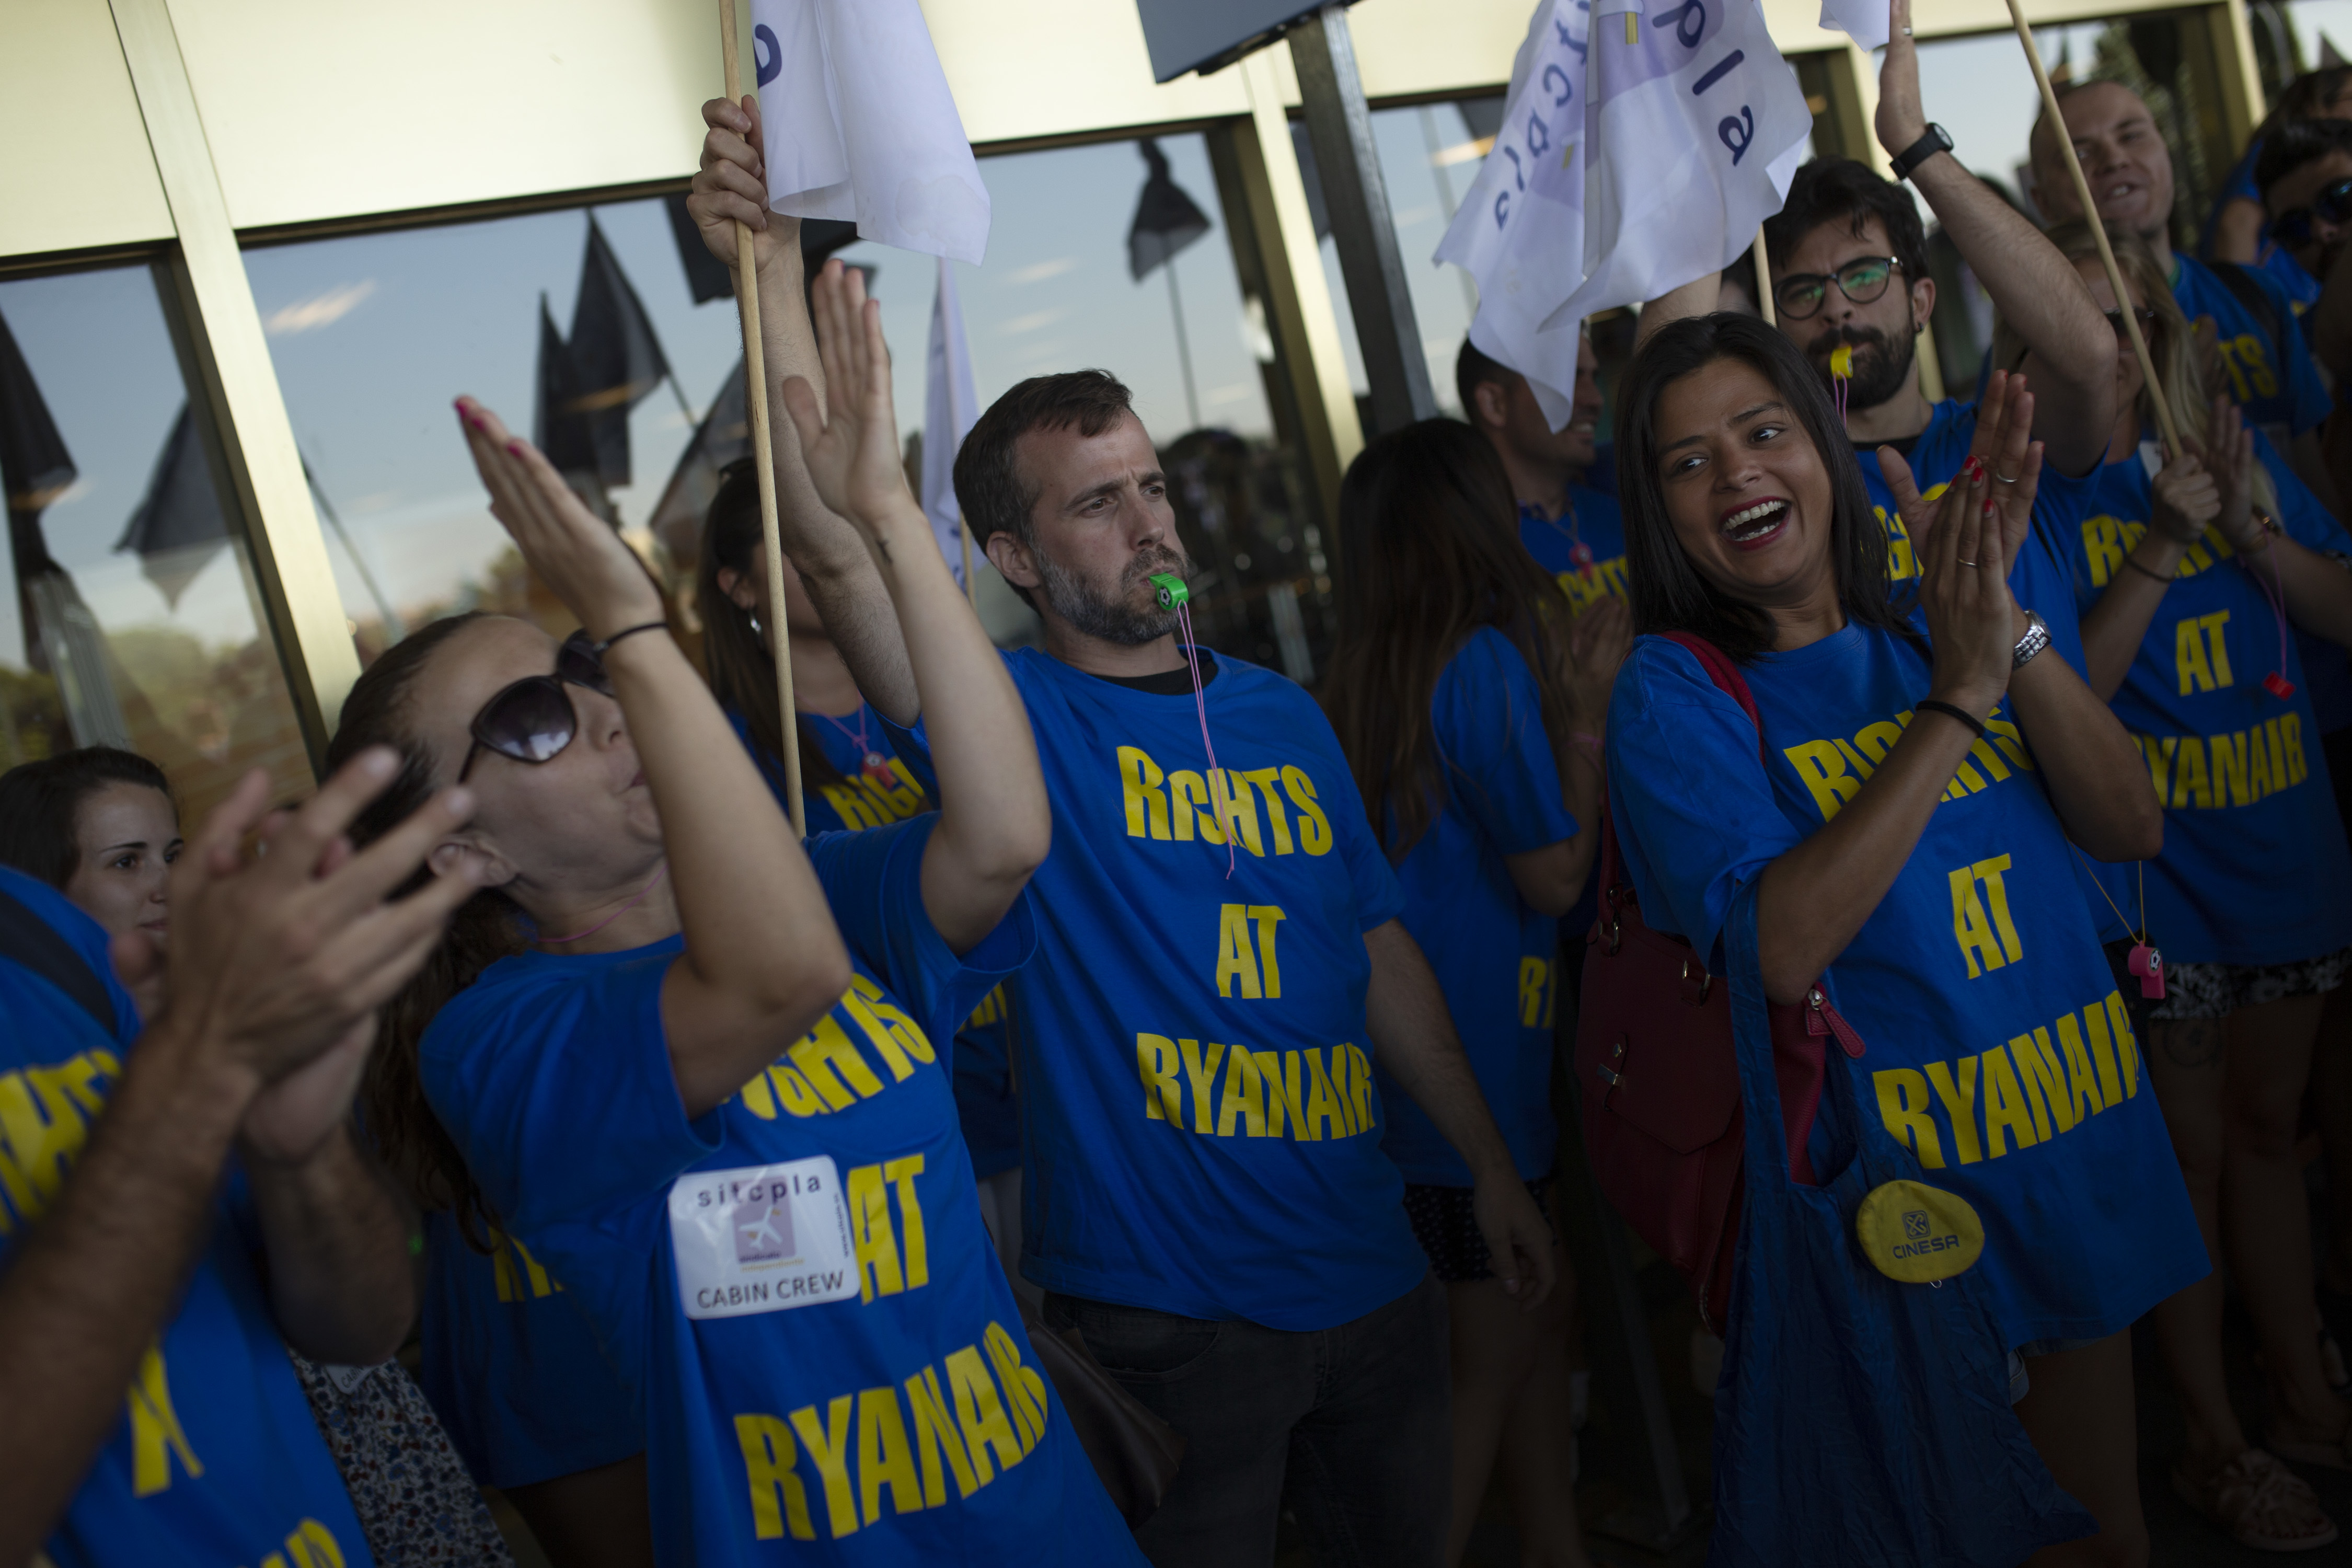 Ryanair airline workers shout slogans during a small protest during the first of two days cabin crew strike at Adolfo Suarez-Barajas international airport in Madrid, Wednesday, July 25, 2018. Cabin crew workers for low-cost airline Ryanair went on strike in four European countries over working conditions, forcing thousands of passengers to make last-minute travel adjustments at the peak of the summer holiday season. (AP Photo/Francisco Seco)